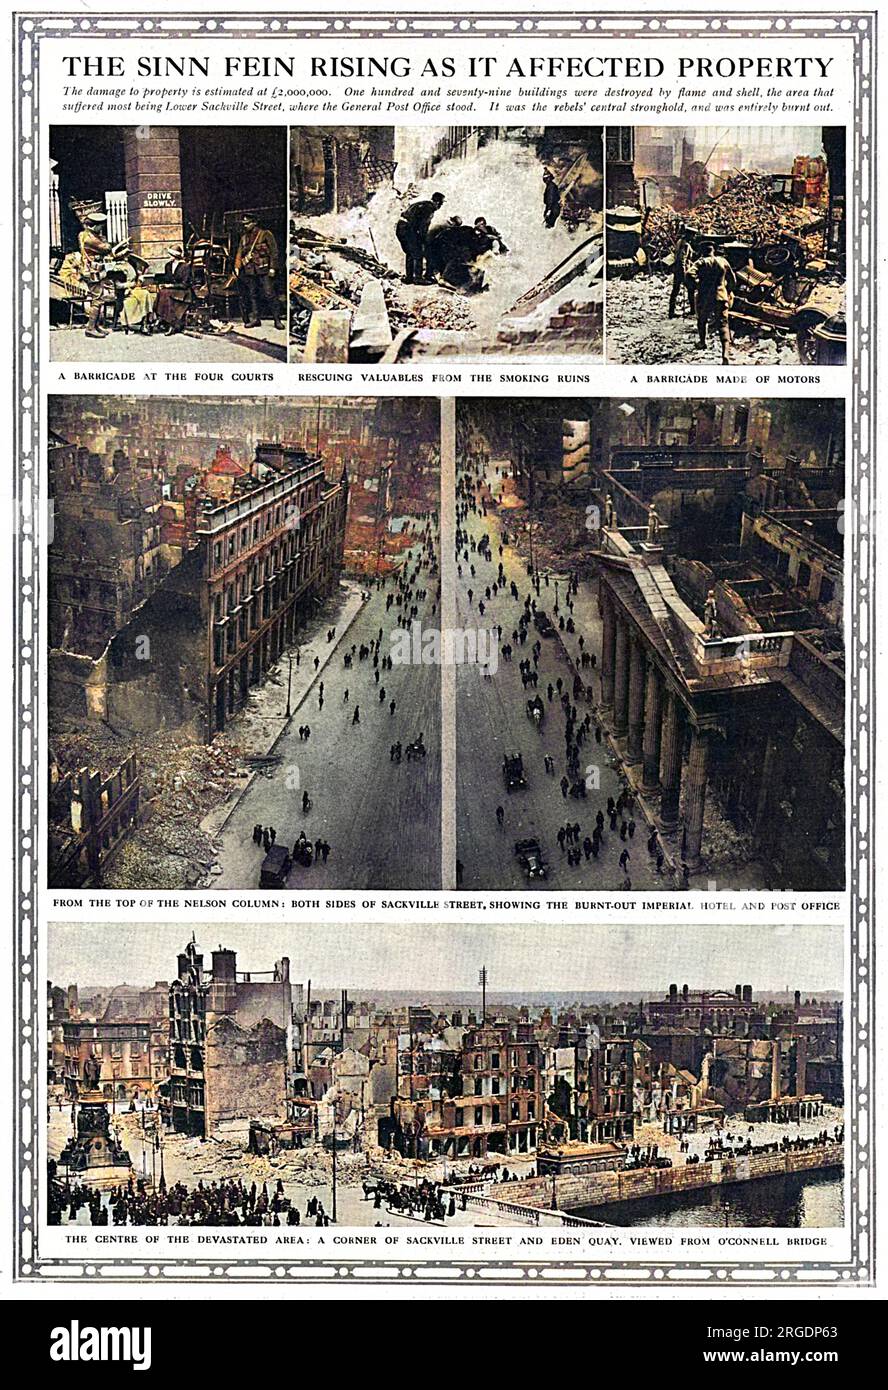 The devastating affects of the Easter Rebellion in Ireland in 1916. The main picture shows the burnt-out imperial hotel and post-office on Sackville Street in Dublin. According to The Graphic, the damage to property was estimated at £2,000,000 and 179 building were destroyed by flame and shell. The area that suffered the most was Lower Sackville Street which was the rebels' central stronghold and was entirely burnt out. Stock Photo